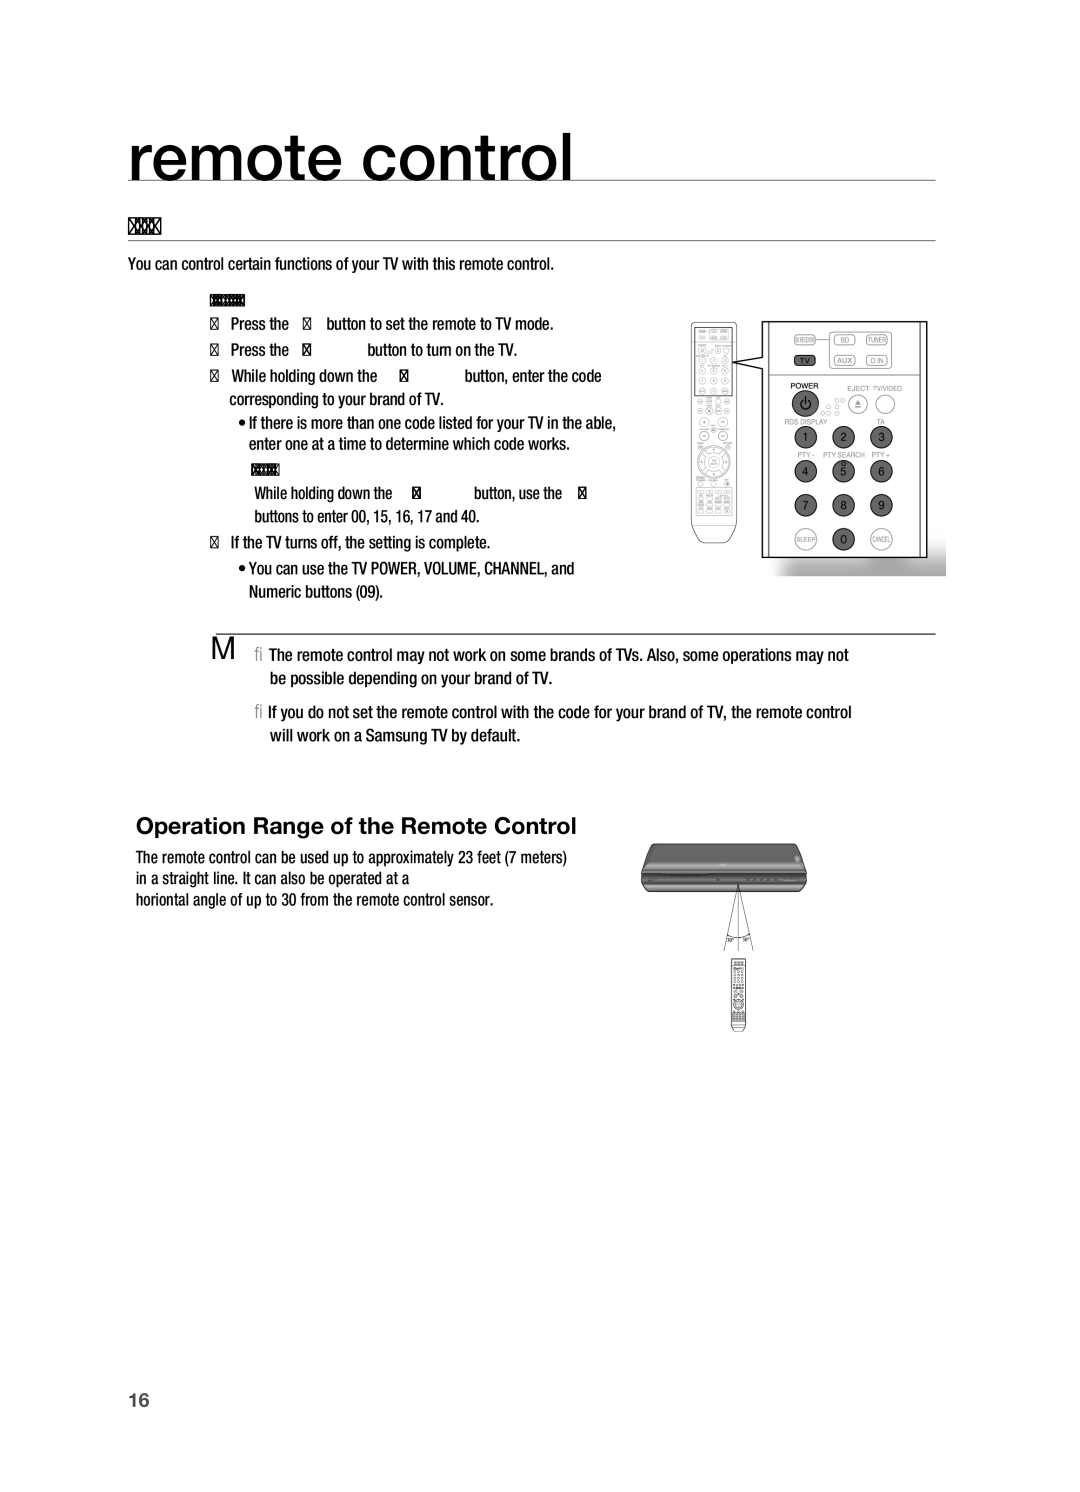 Samsung HT-BD2R/XET, HT-BD2R/XEF, HT-BD2R/XEO, HT-BD2R/XEE SETTInG the Remote COnTROL, Operation Range of the Remote Control 